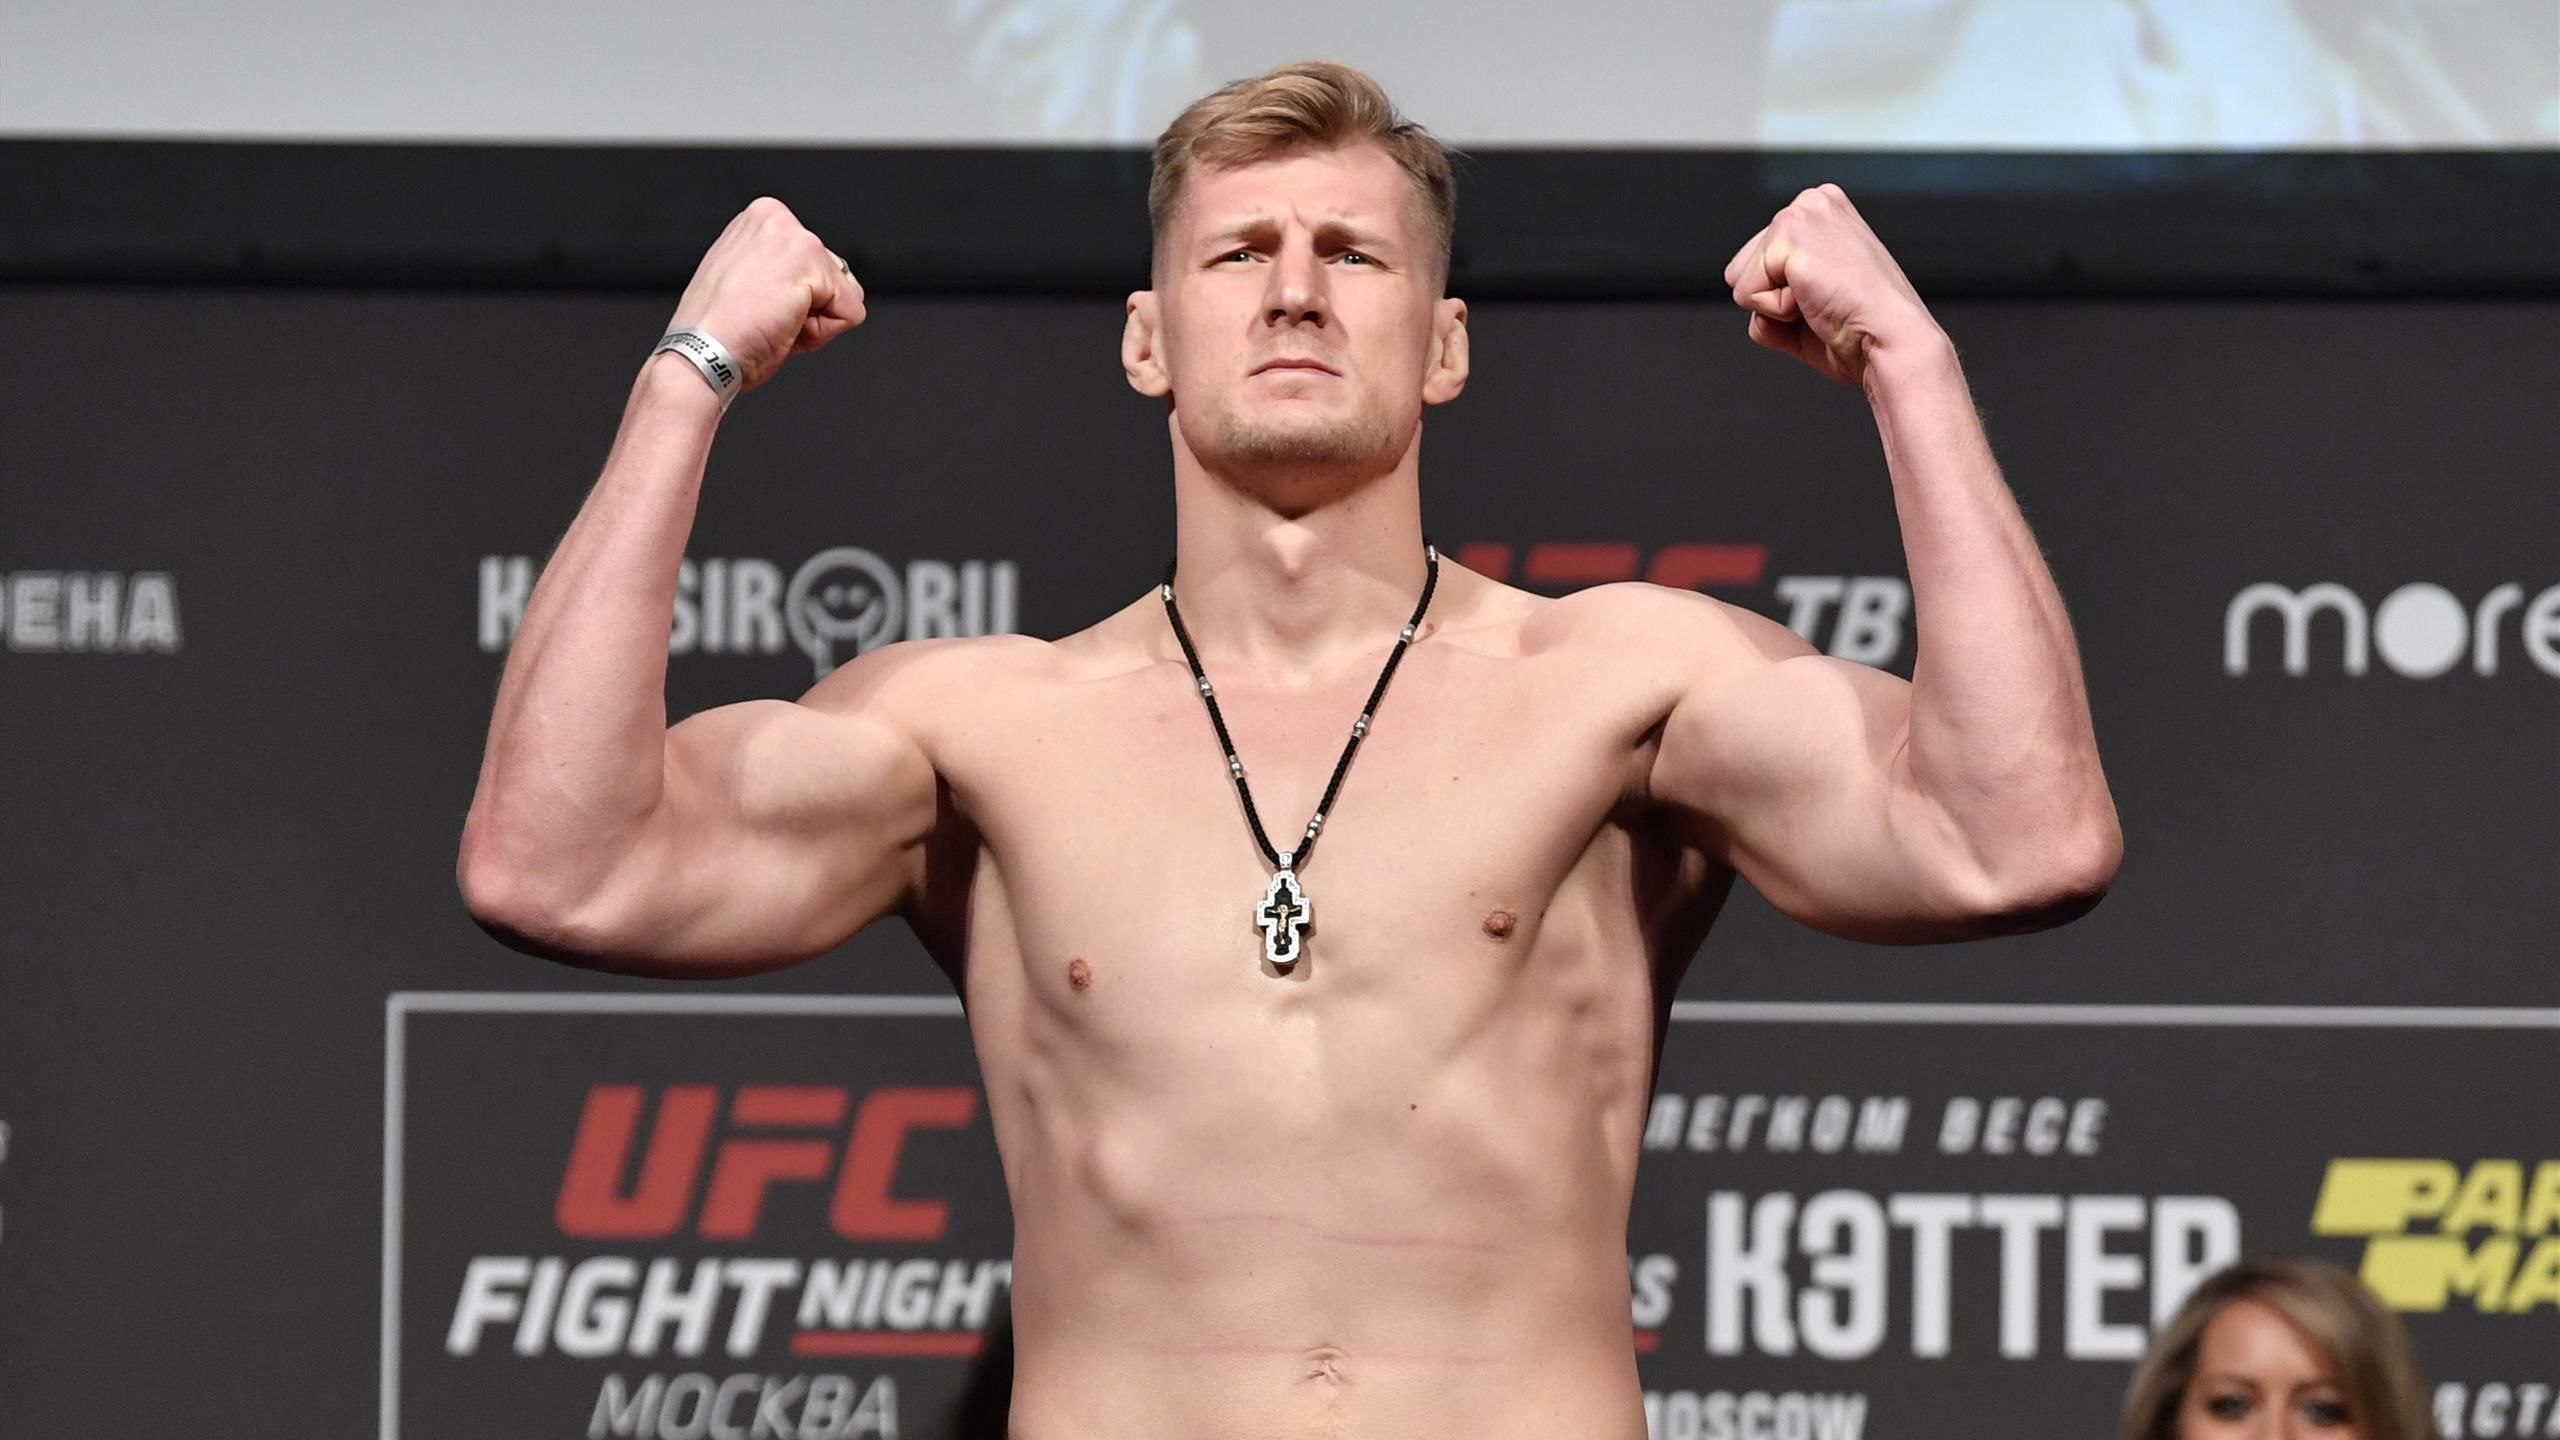 Volkov, Sylvia, Struve, and Other Giants: Top 10 Tallest MMA Fighters